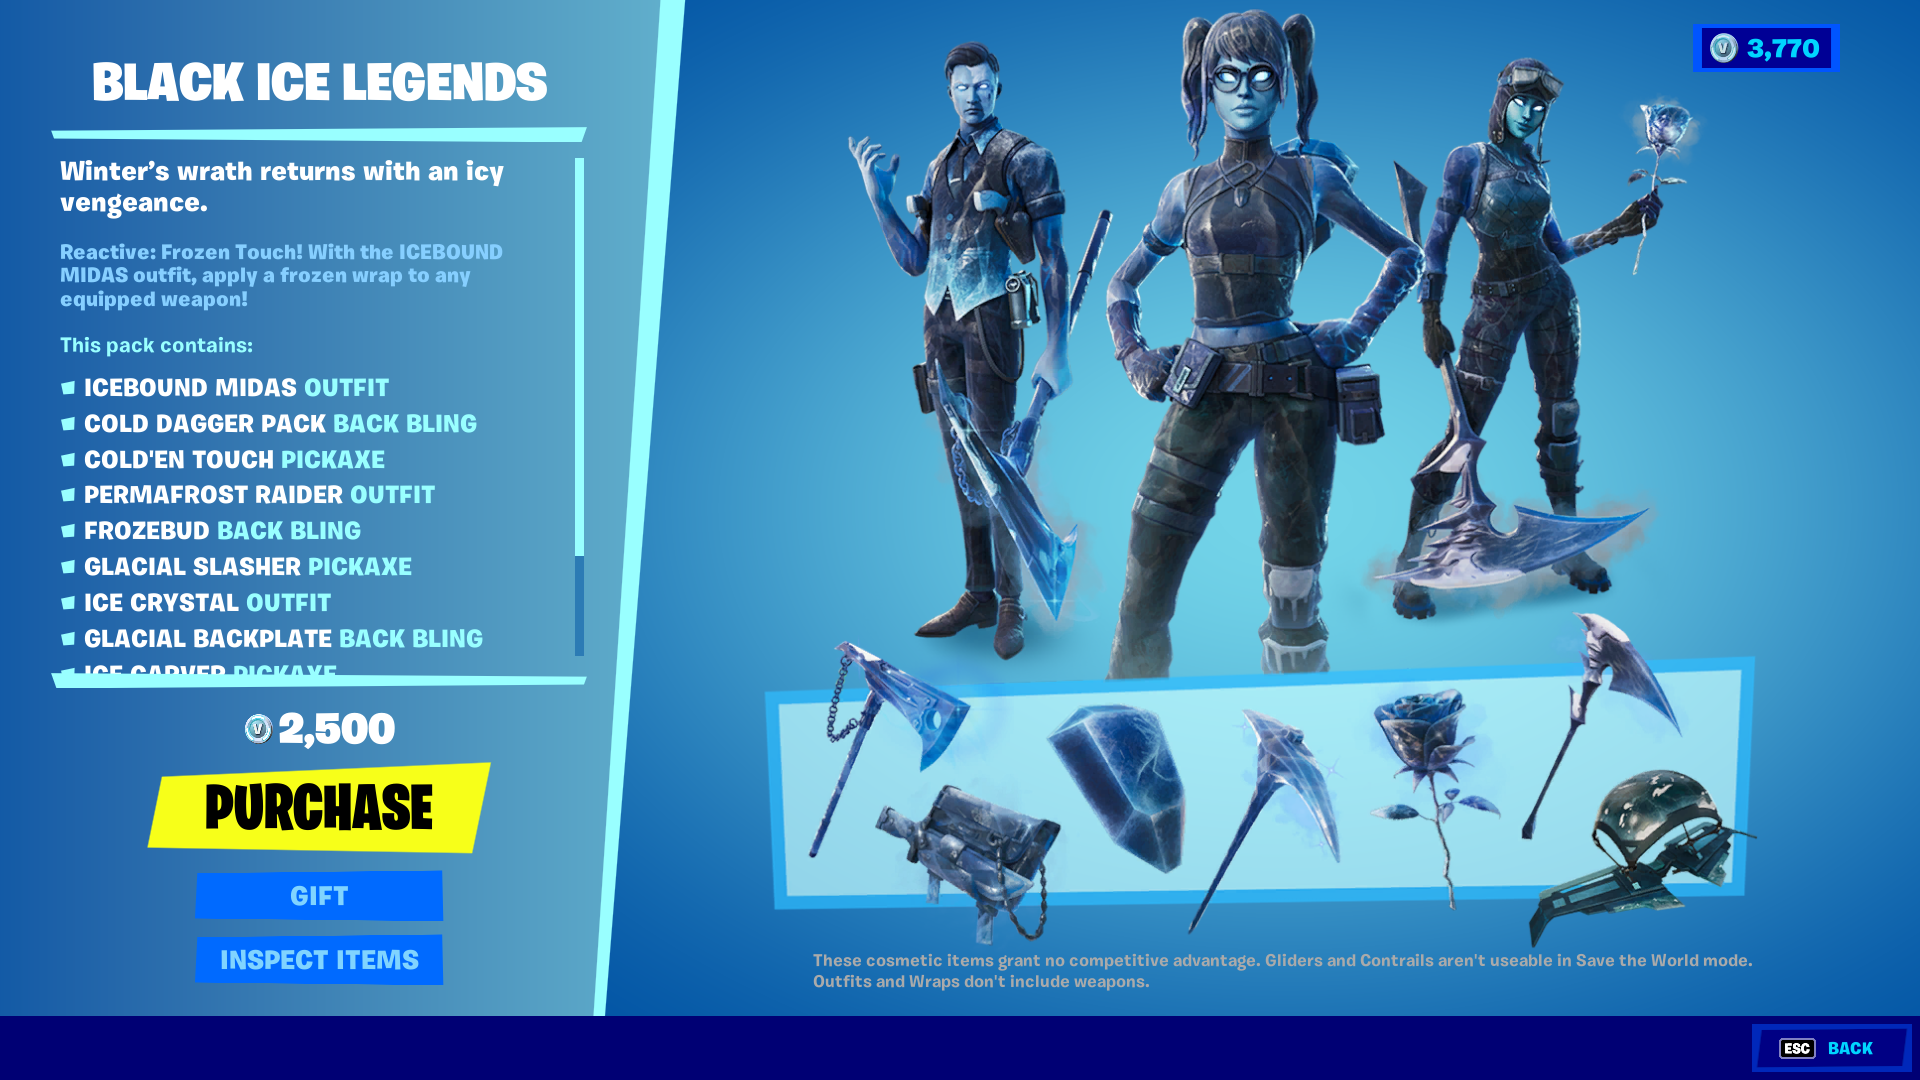 The new Black Ice Legends Pack is now available